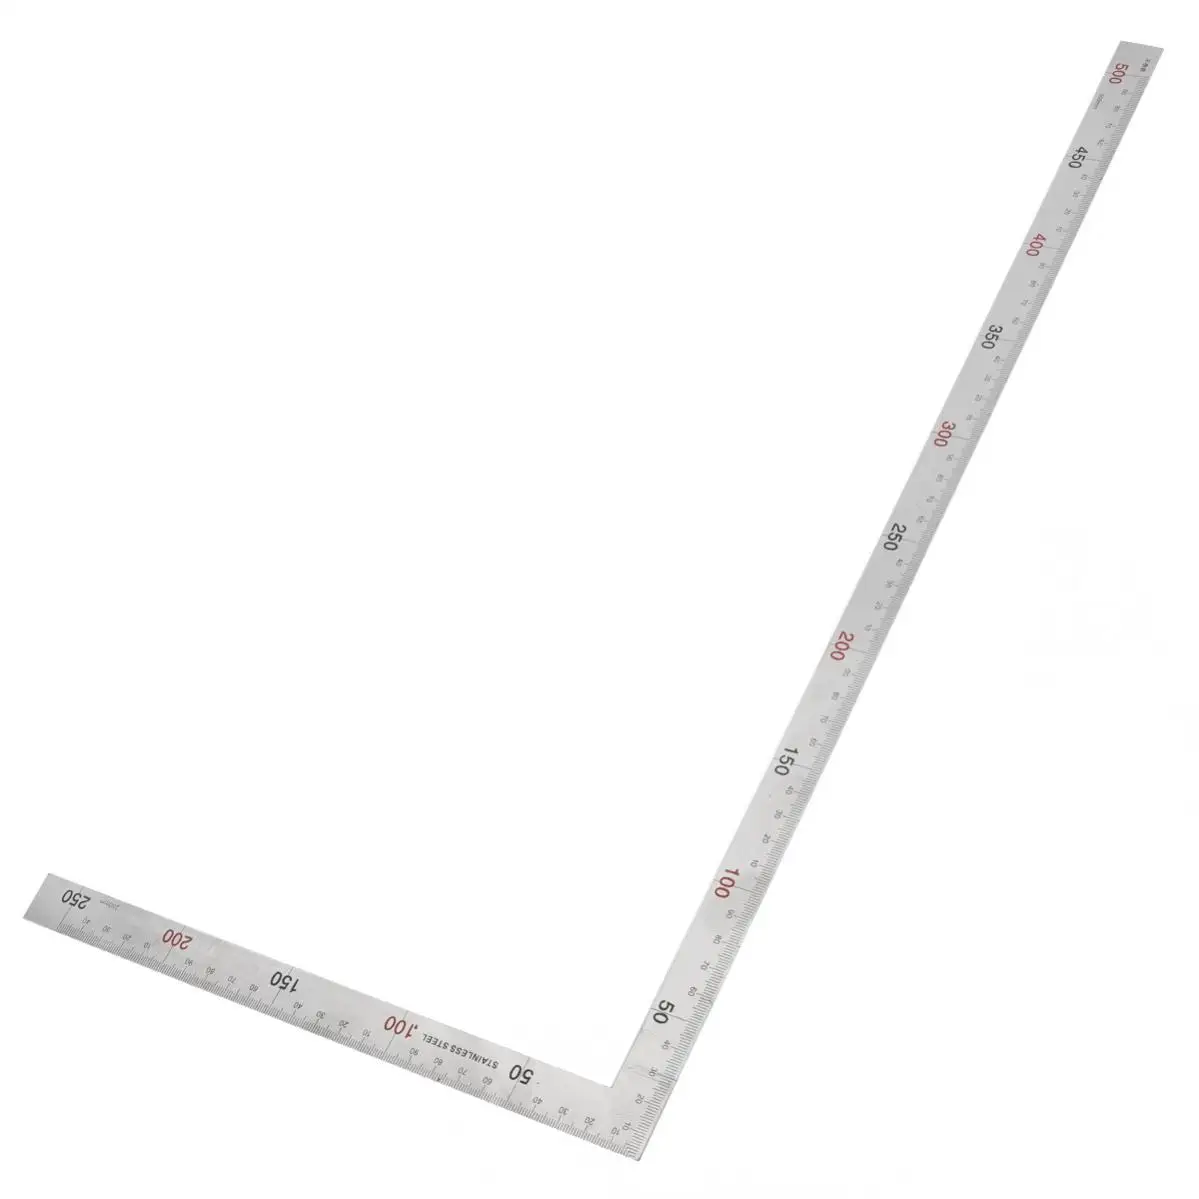 250 x 500mm Thicker 1mm 90 Degree Right Angle Ruler for Woodworking Office Stainless Steel Ruler